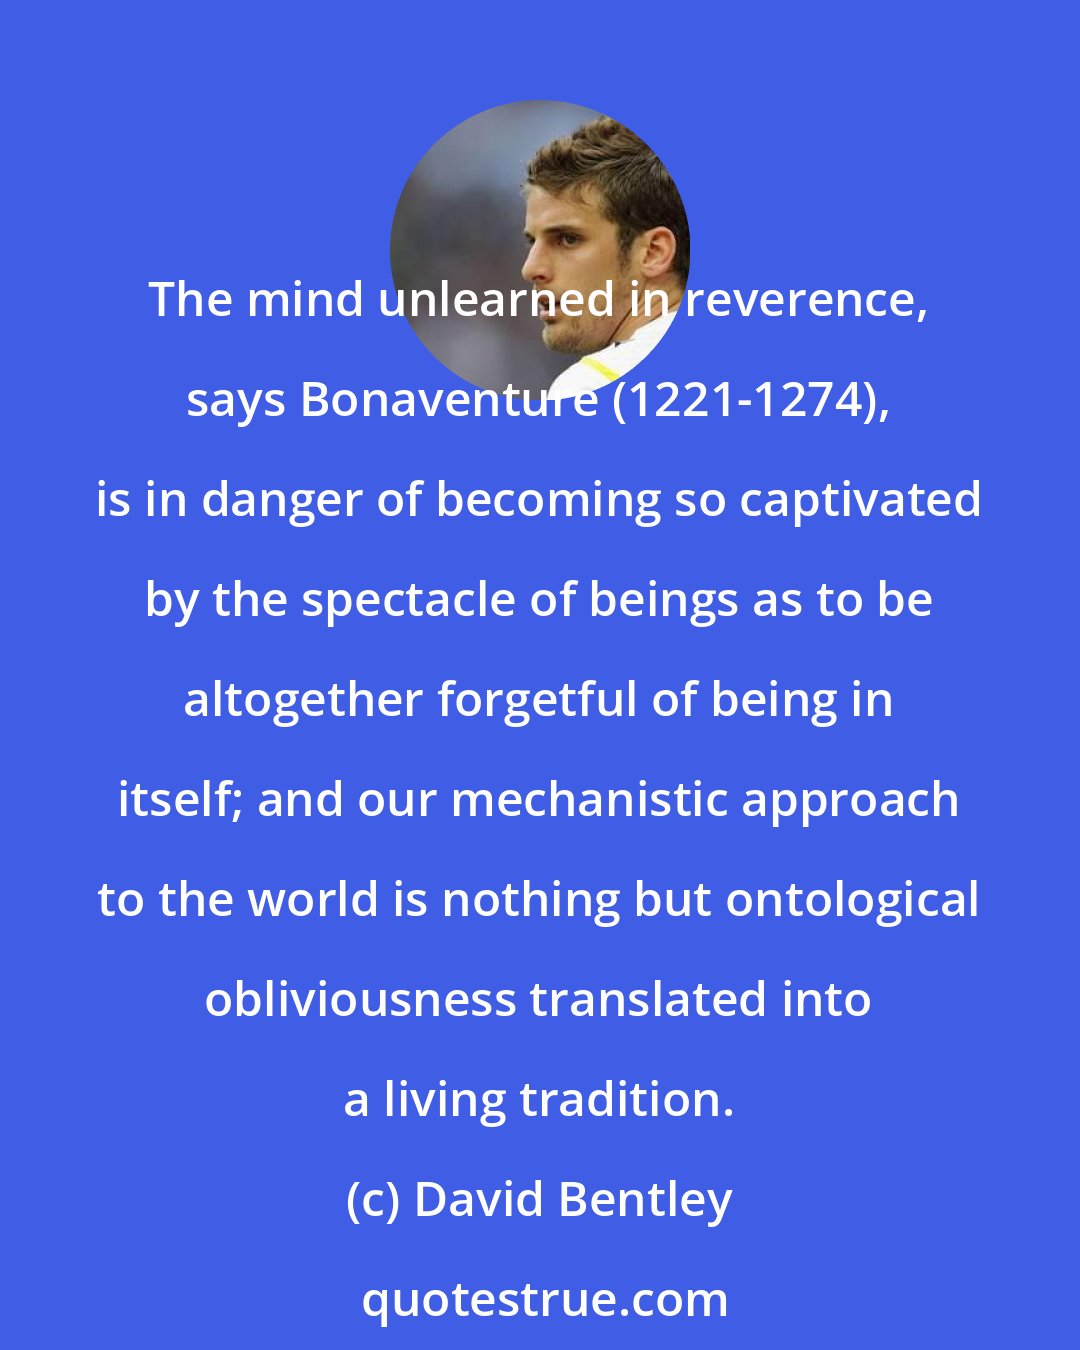 David Bentley: The mind unlearned in reverence, says Bonaventure (1221-1274), is in danger of becoming so captivated by the spectacle of beings as to be altogether forgetful of being in itself; and our mechanistic approach to the world is nothing but ontological obliviousness translated into a living tradition.